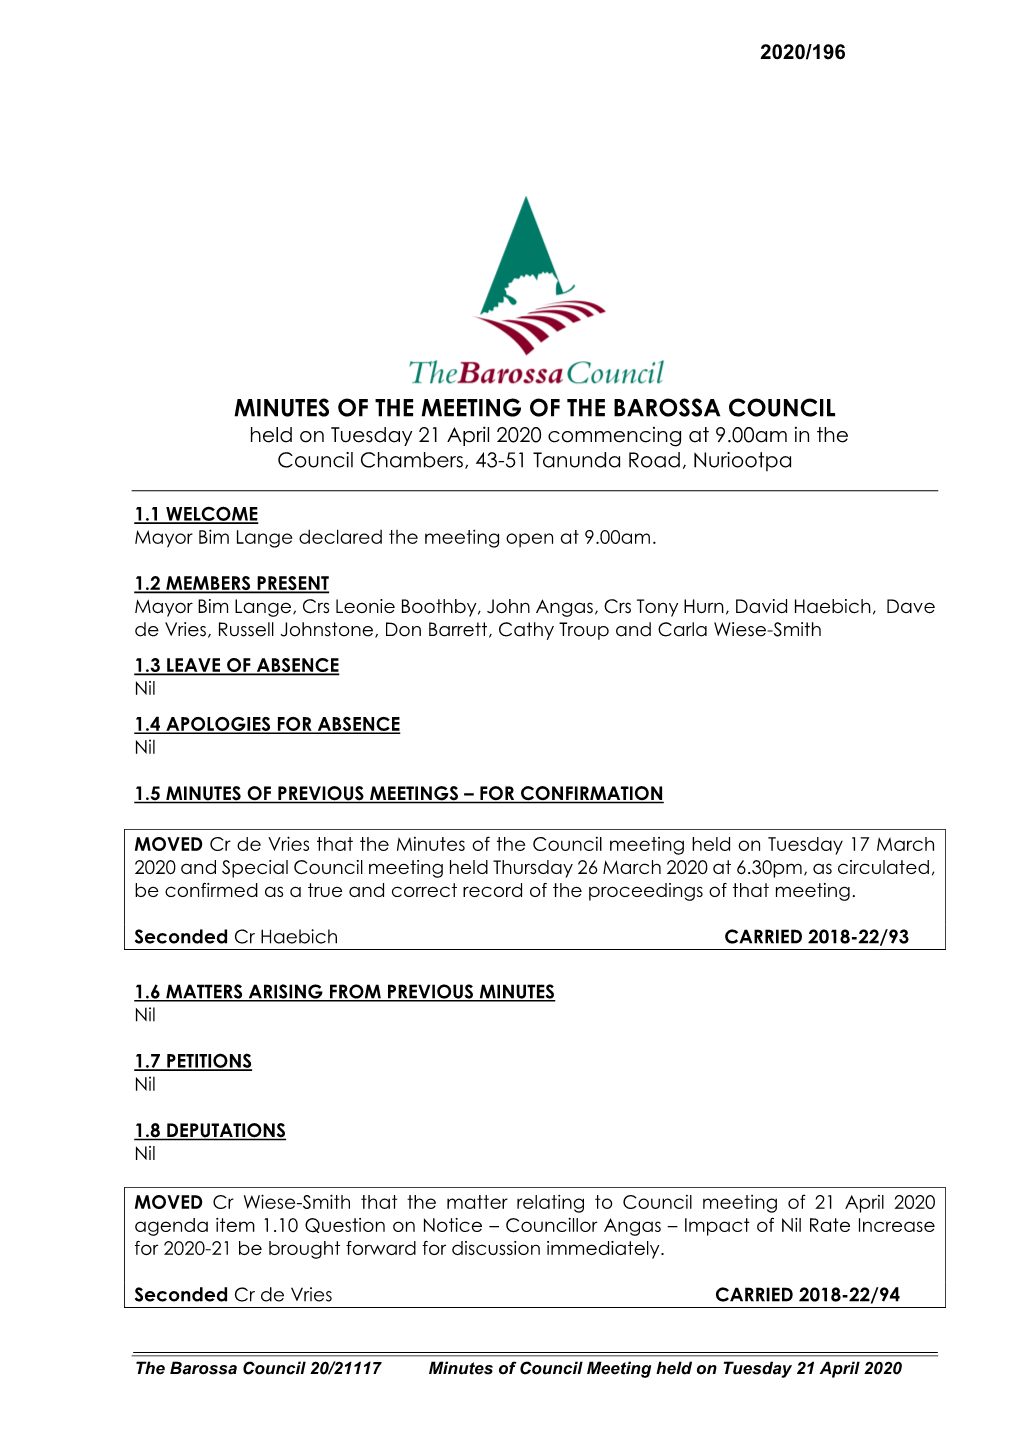 MINUTES of the MEETING of the BAROSSA COUNCIL Held on Tuesday 21 April 2020 Commencing at 9.00Am in the Council Chambers, 43-51 Tanunda Road, Nuriootpa